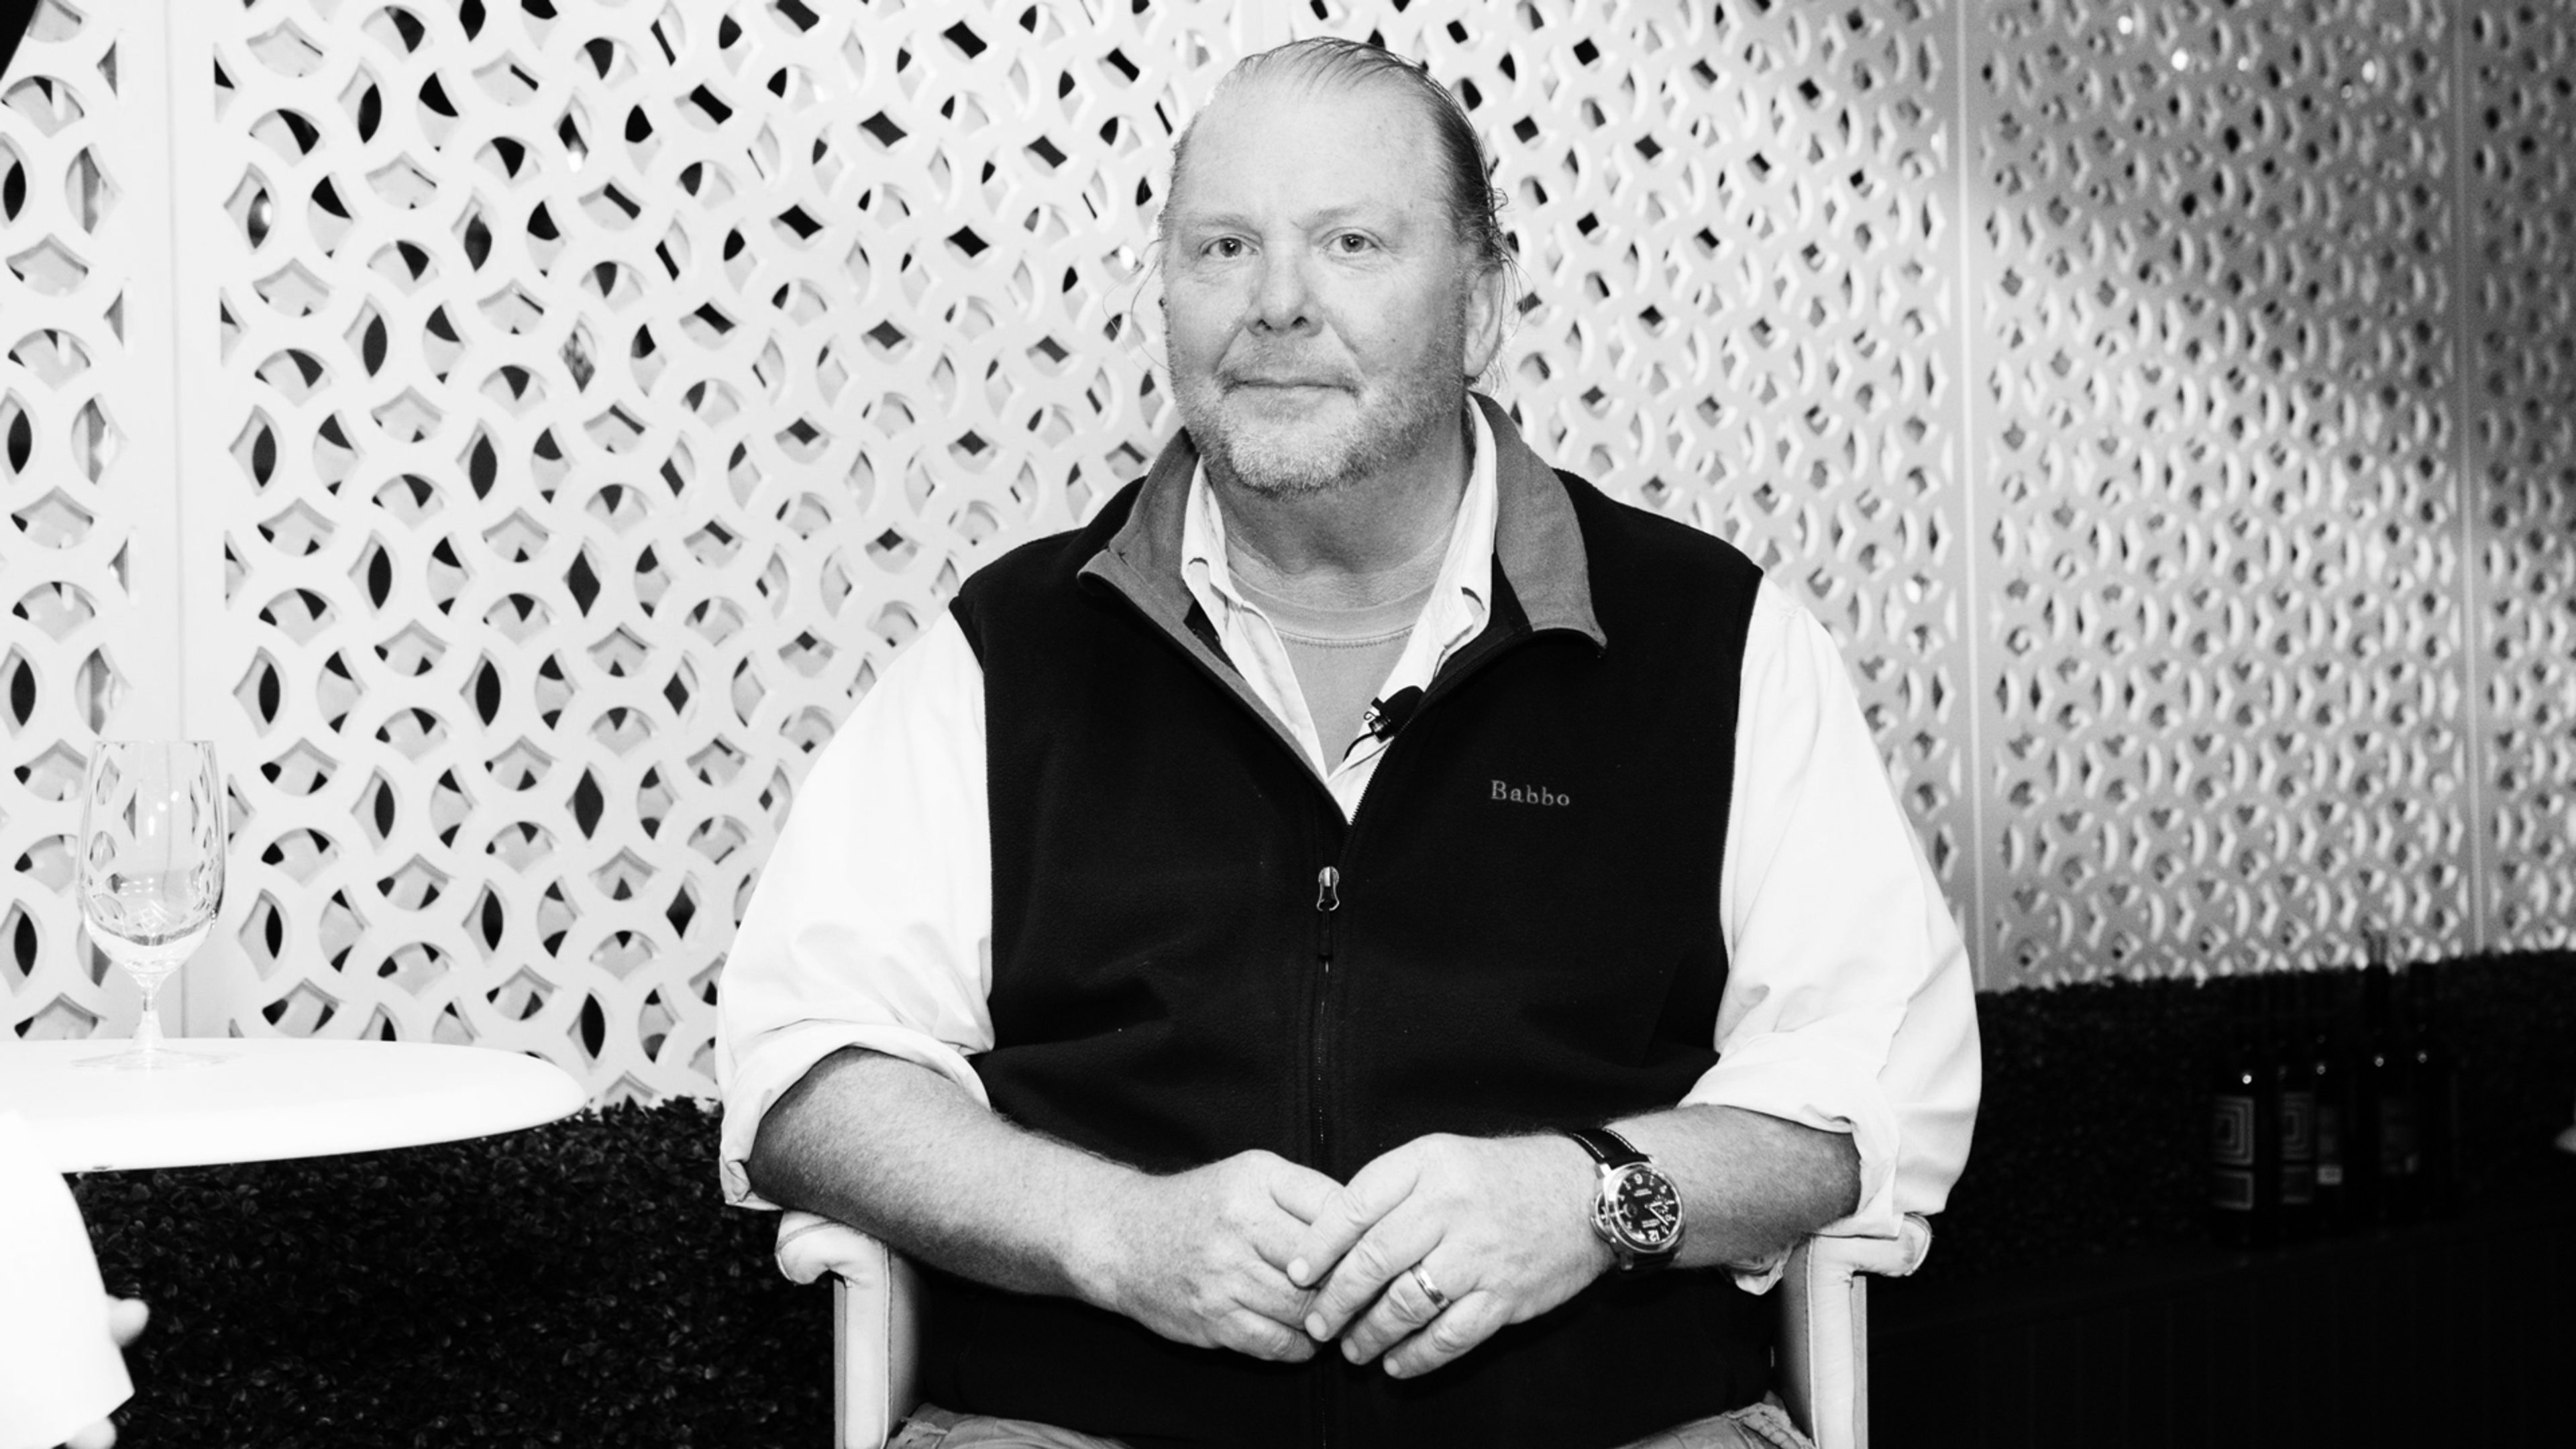 Report: Mario Batali will face criminal assault charges in Boston